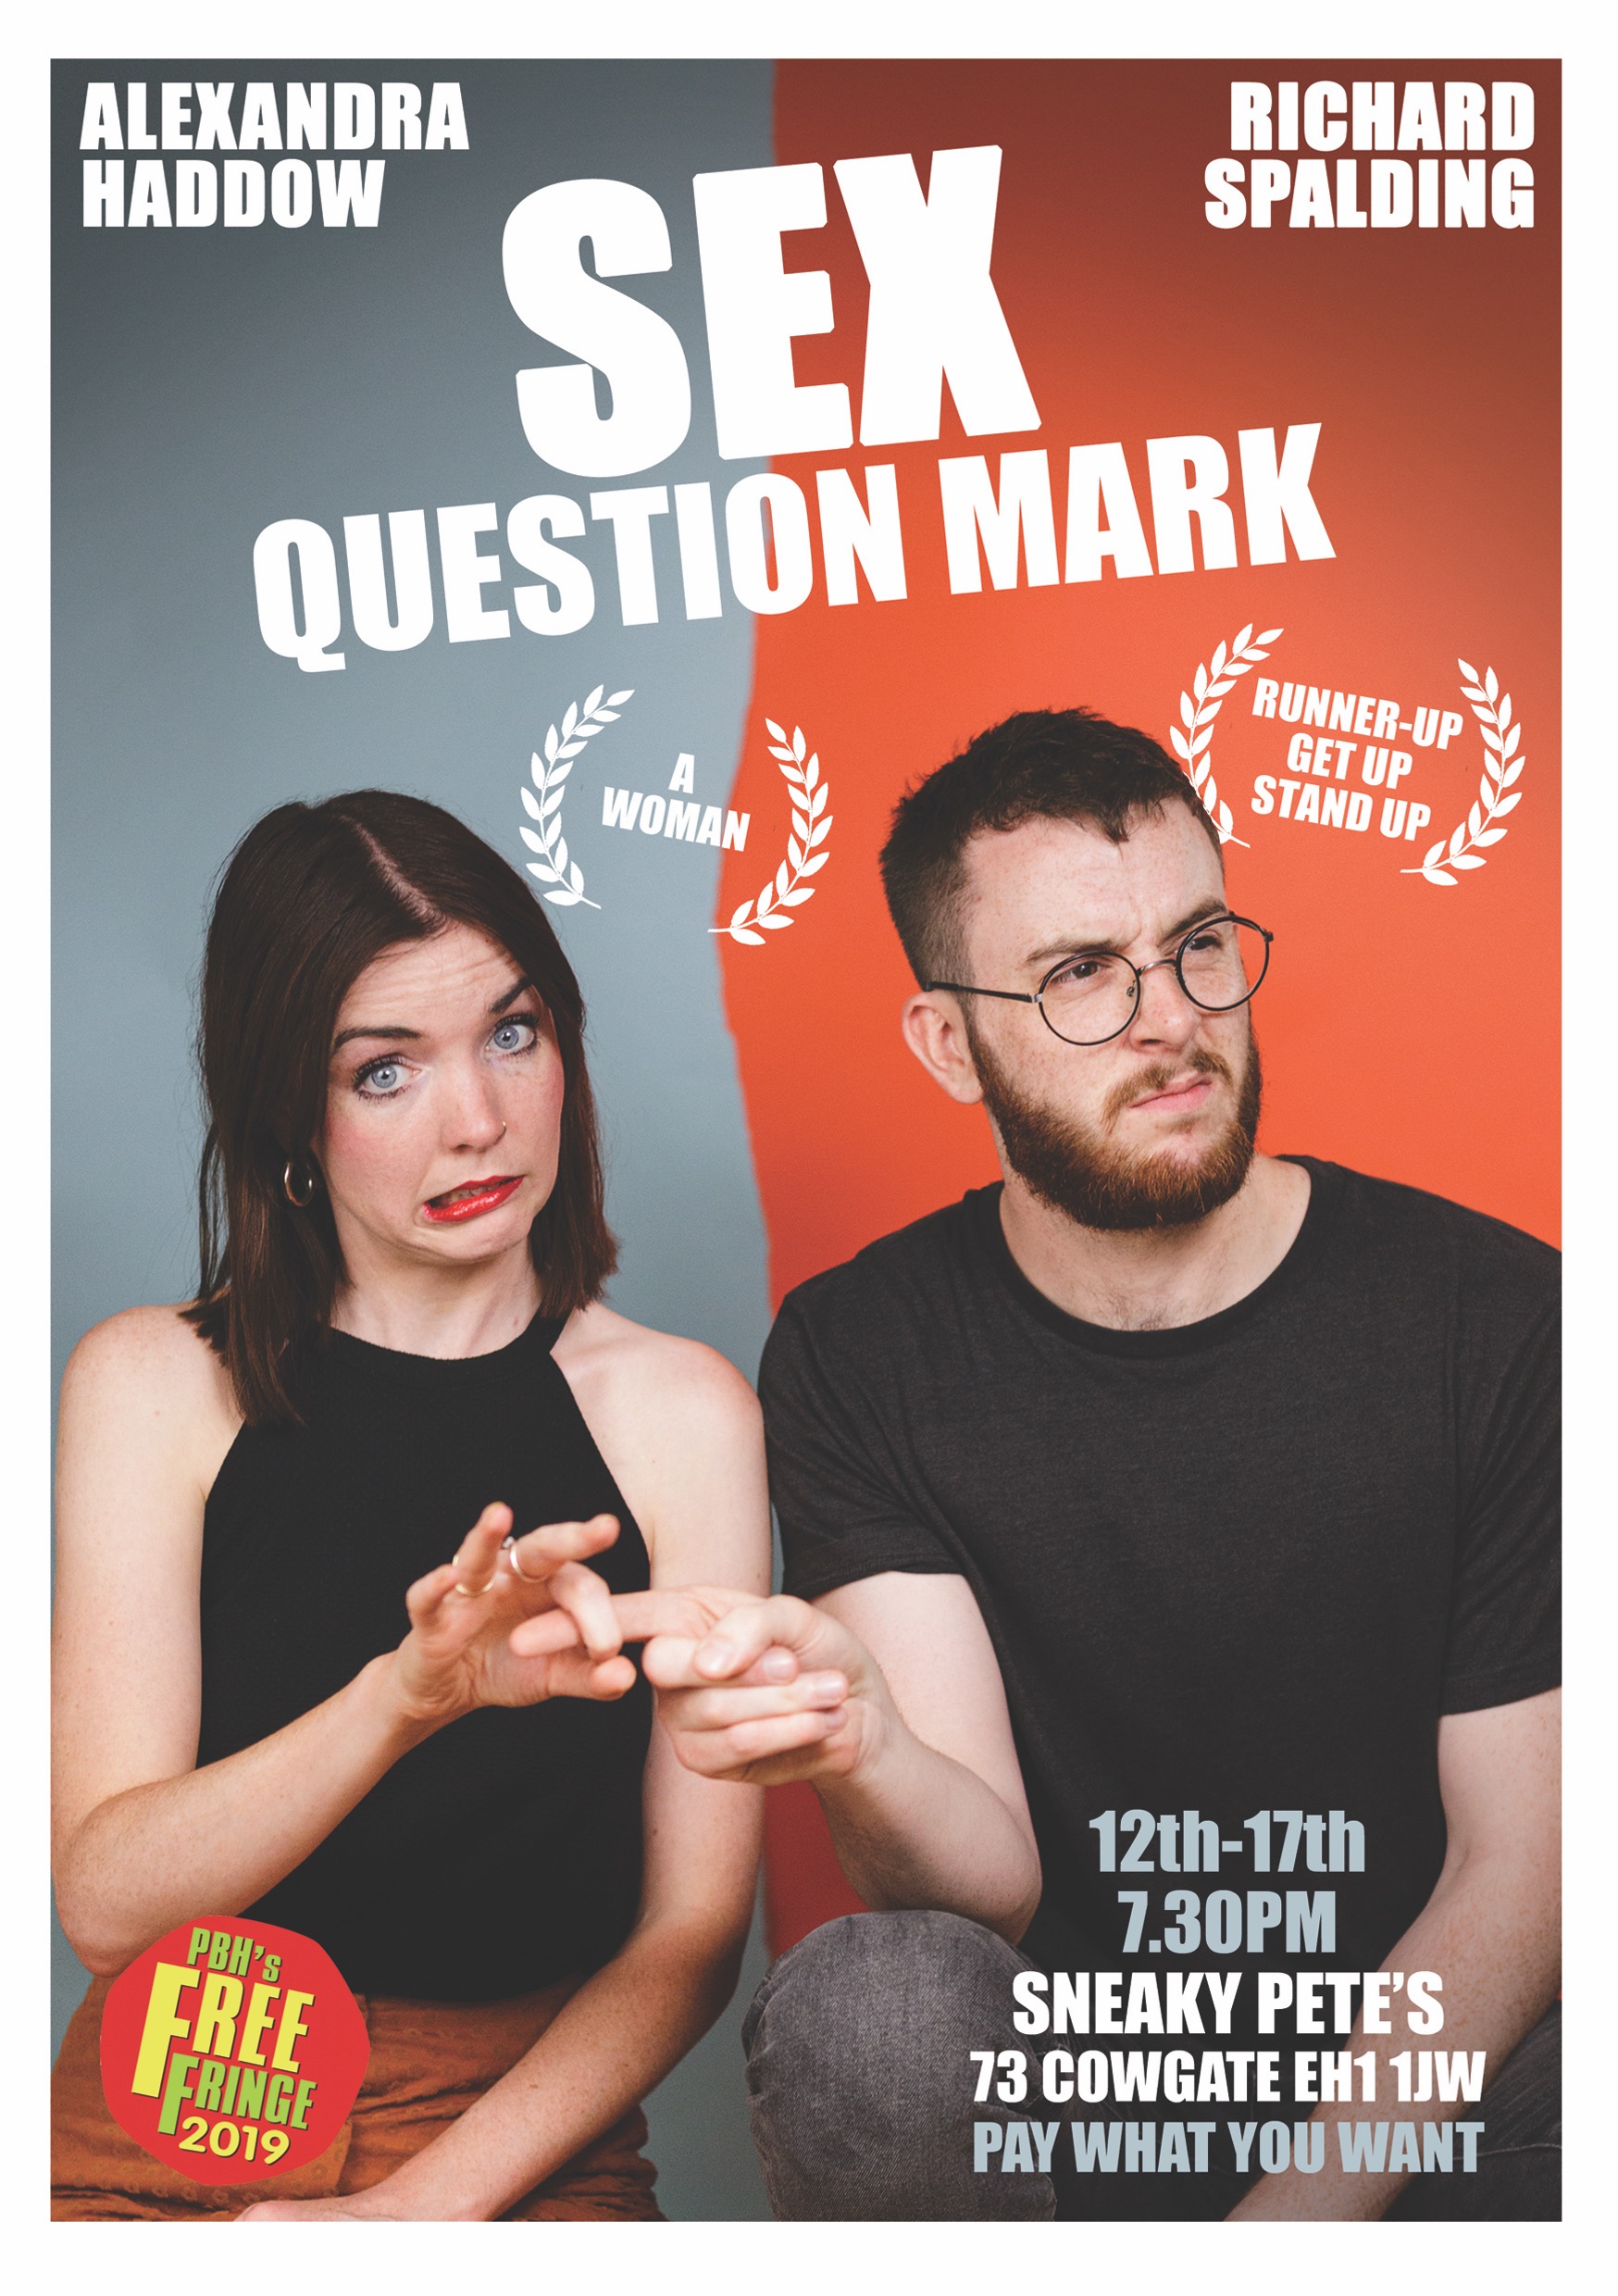 The poster for Sex Question Mark